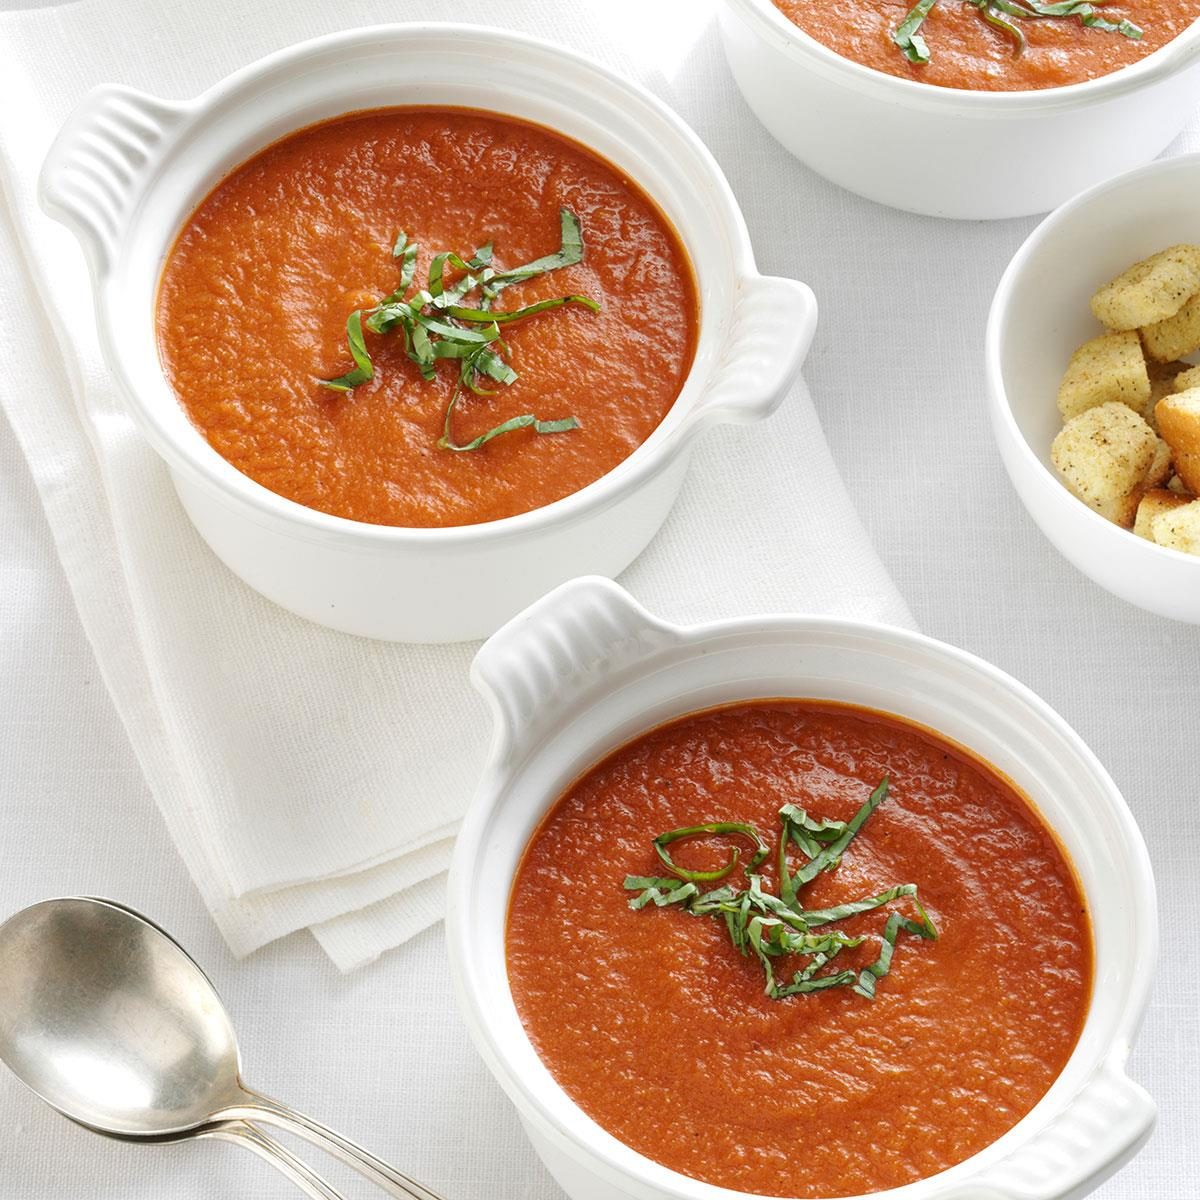 https://www.tasteofhome.com/wp-content/uploads/2018/01/Roasted-Tomato-Soup-with-Fresh-Basil_exps42059_TH2847295B02_21_7bC_RMS-4.jpg